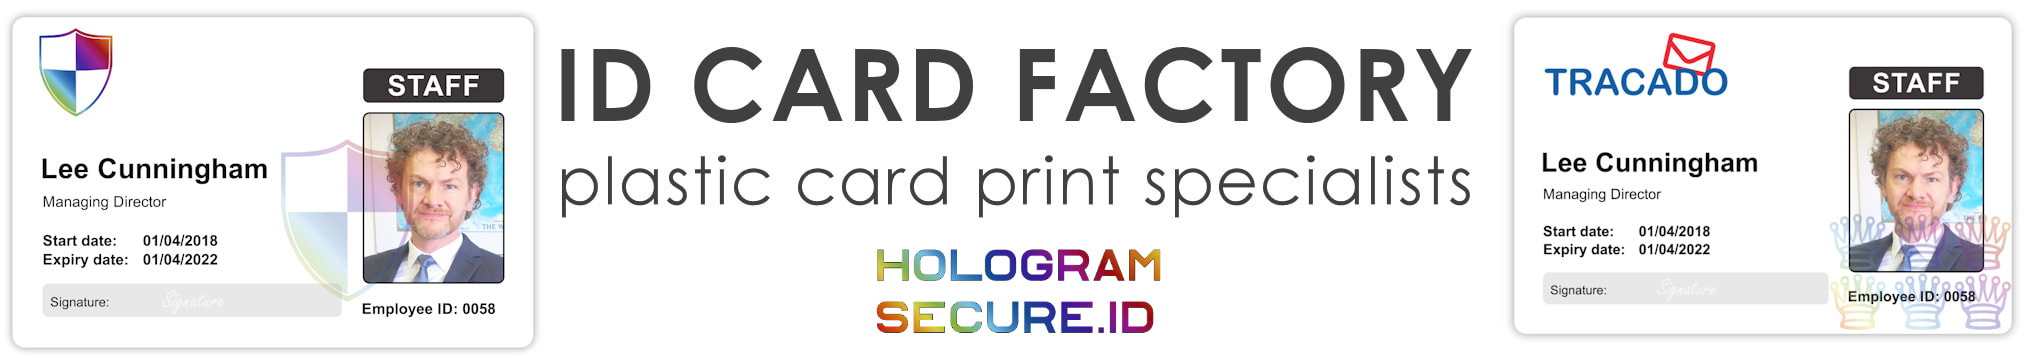 Manchester holographic ID cards | examples of staff photo ID cards | samples of employee Identity card printing | Workers ID cards printed with hologram